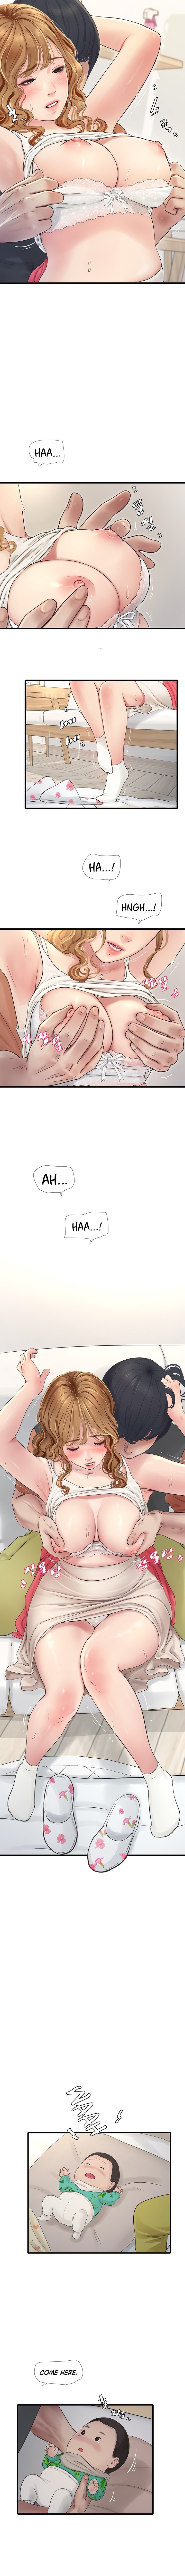 the-hole-diary-chap-4-5